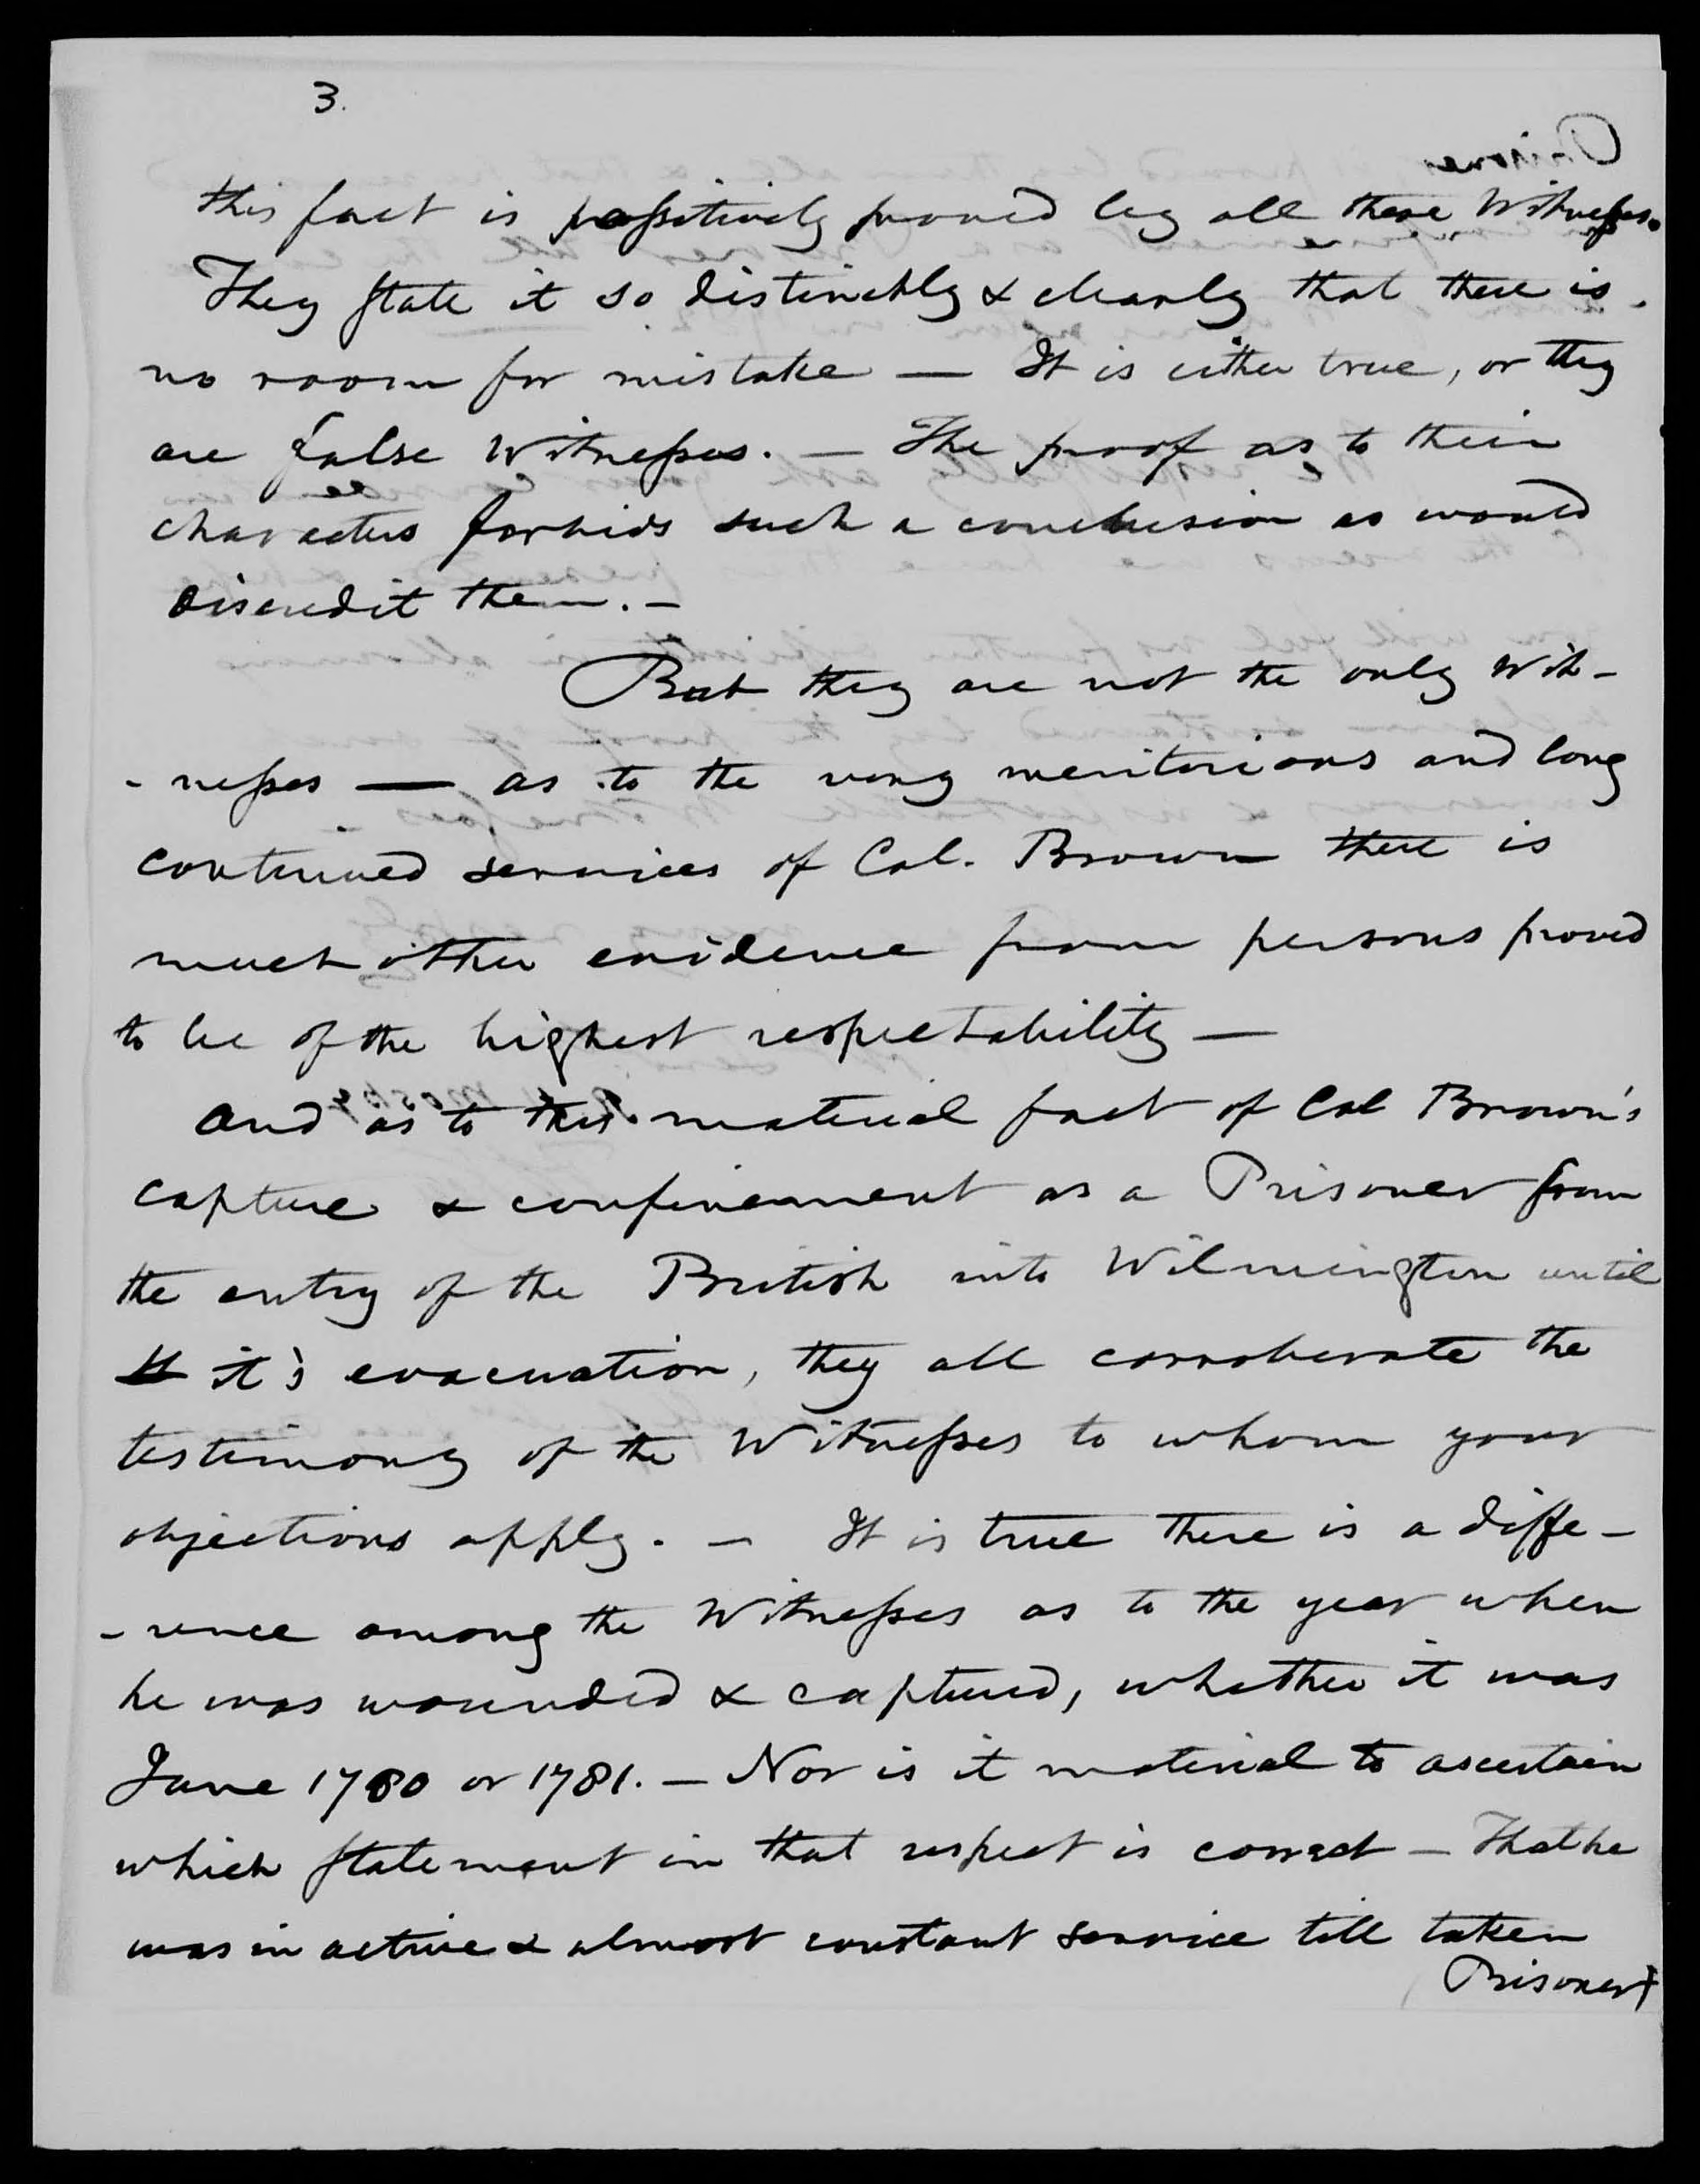 Letter from R. H. Mosby and Lucy Brown to the United States Pension Office, 19 June 1839, page 9